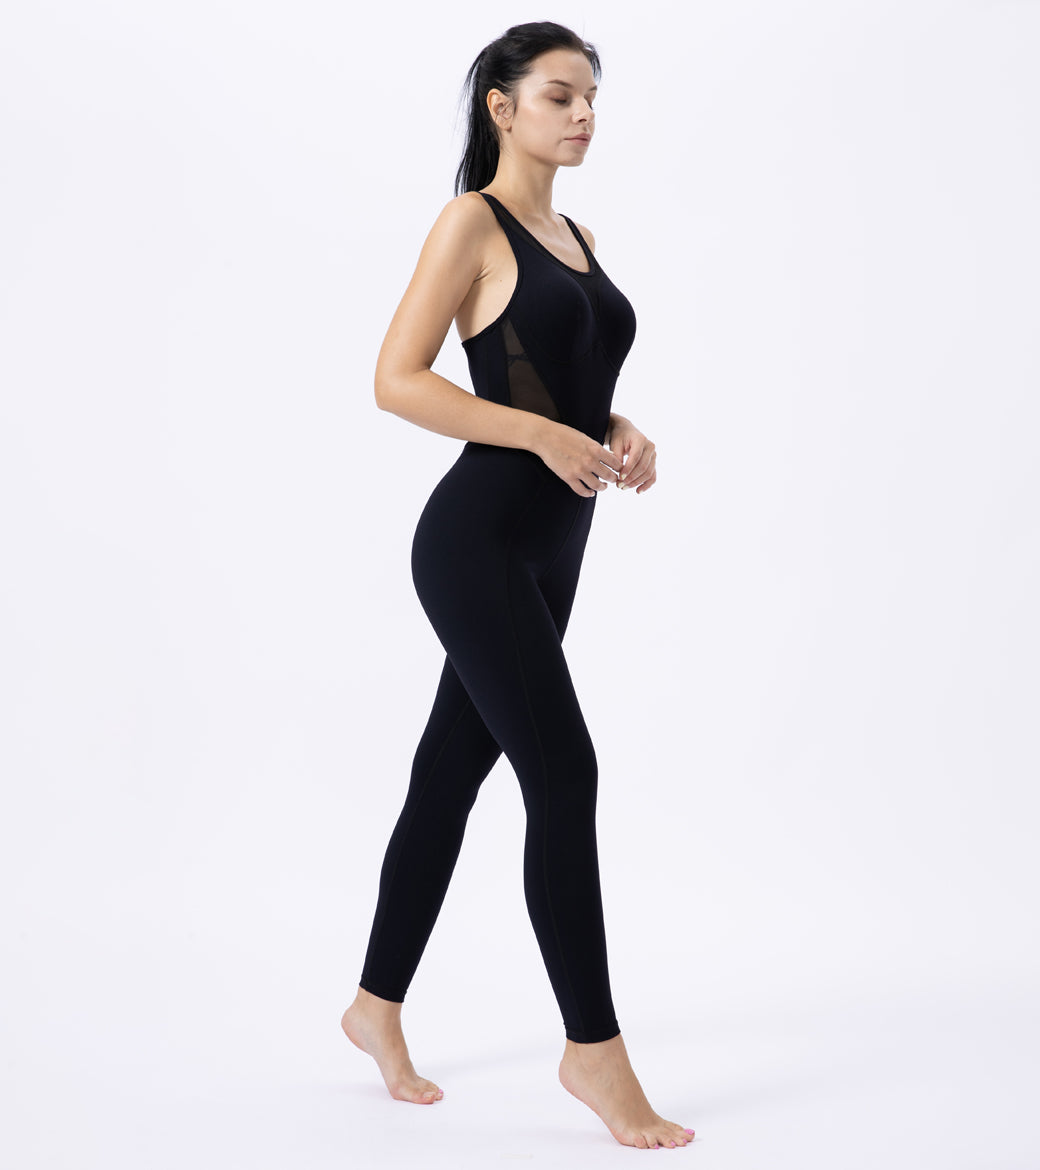 LOVESOFT Women's Sleevesless Bodysuit Dance Unitard, Backless Bodycon Rompers Jumpsuits for Workout Yoga